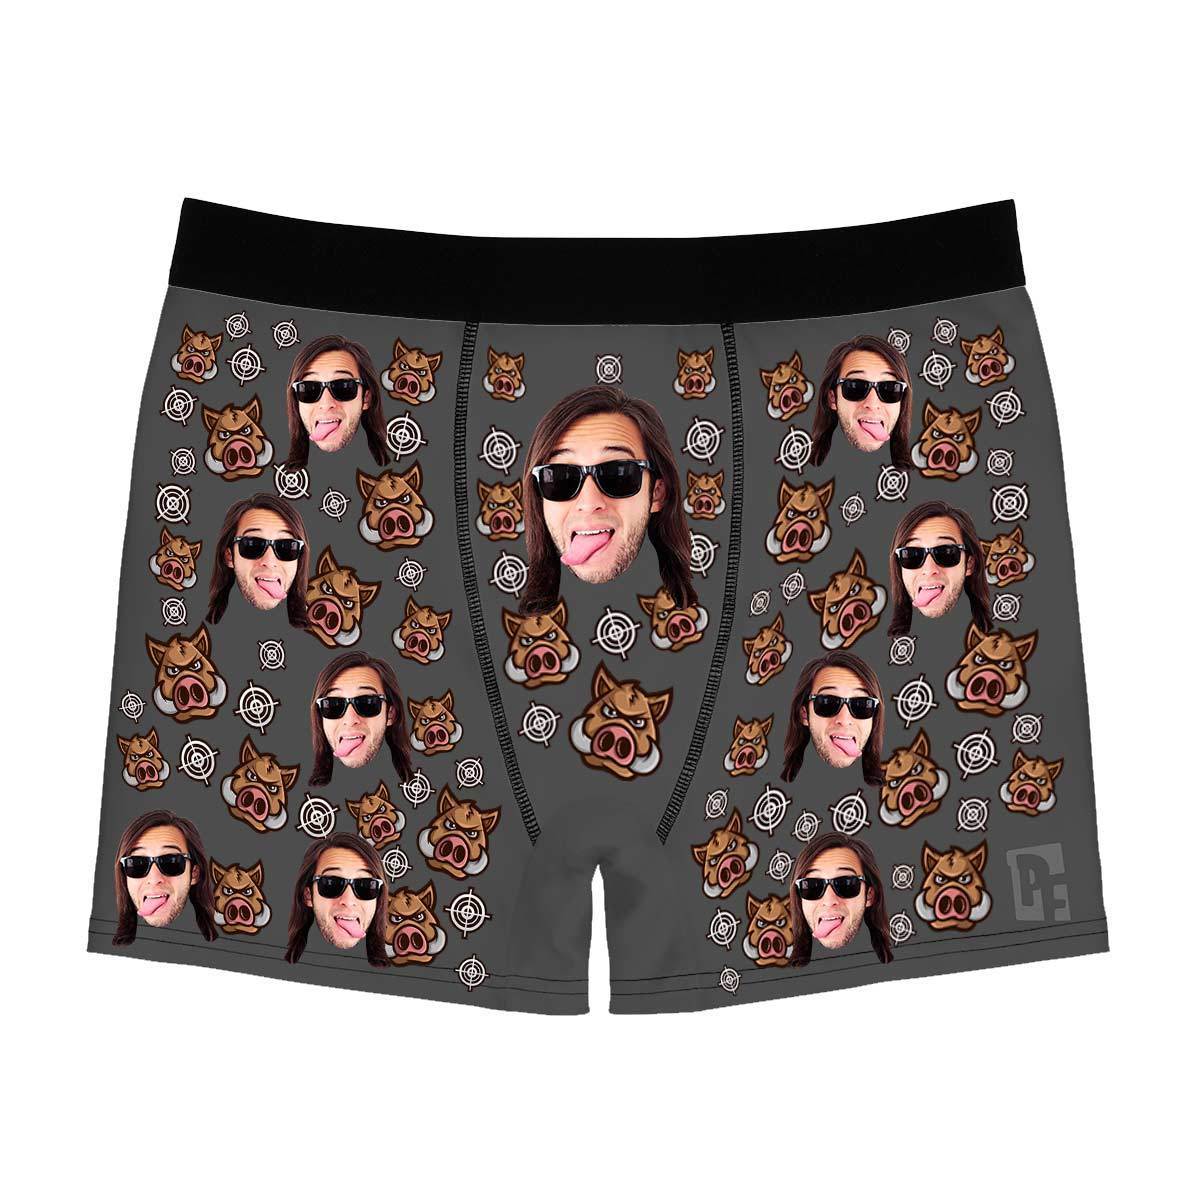 Dark Boar Hunter men's boxer briefs personalized with photo printed on them